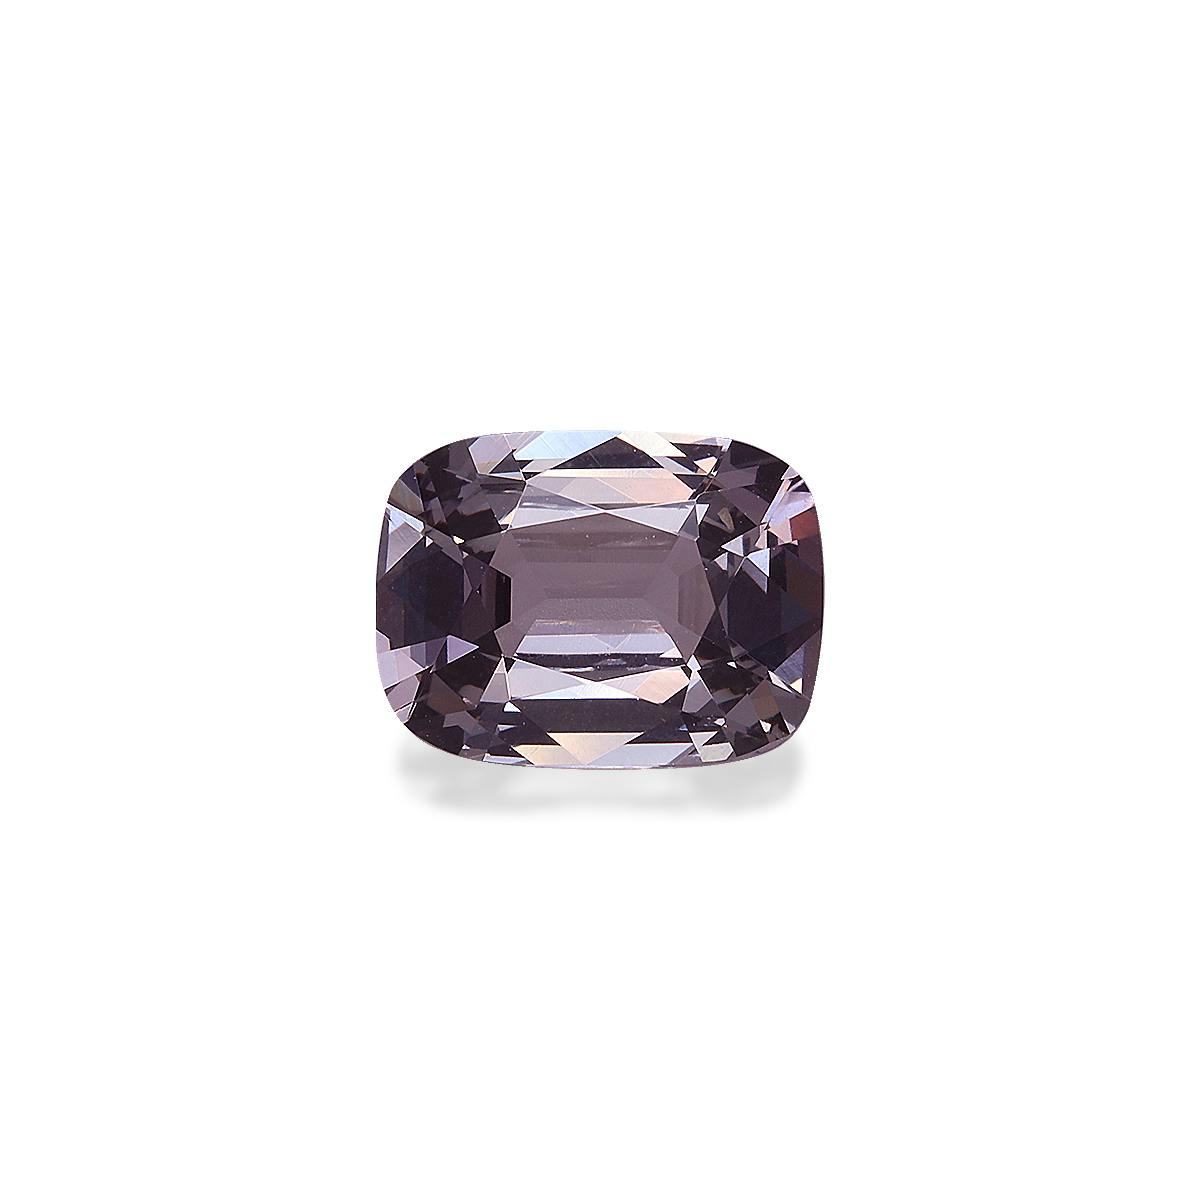 Grey Spinel 1.60ct - 8x6mm (SP0287)